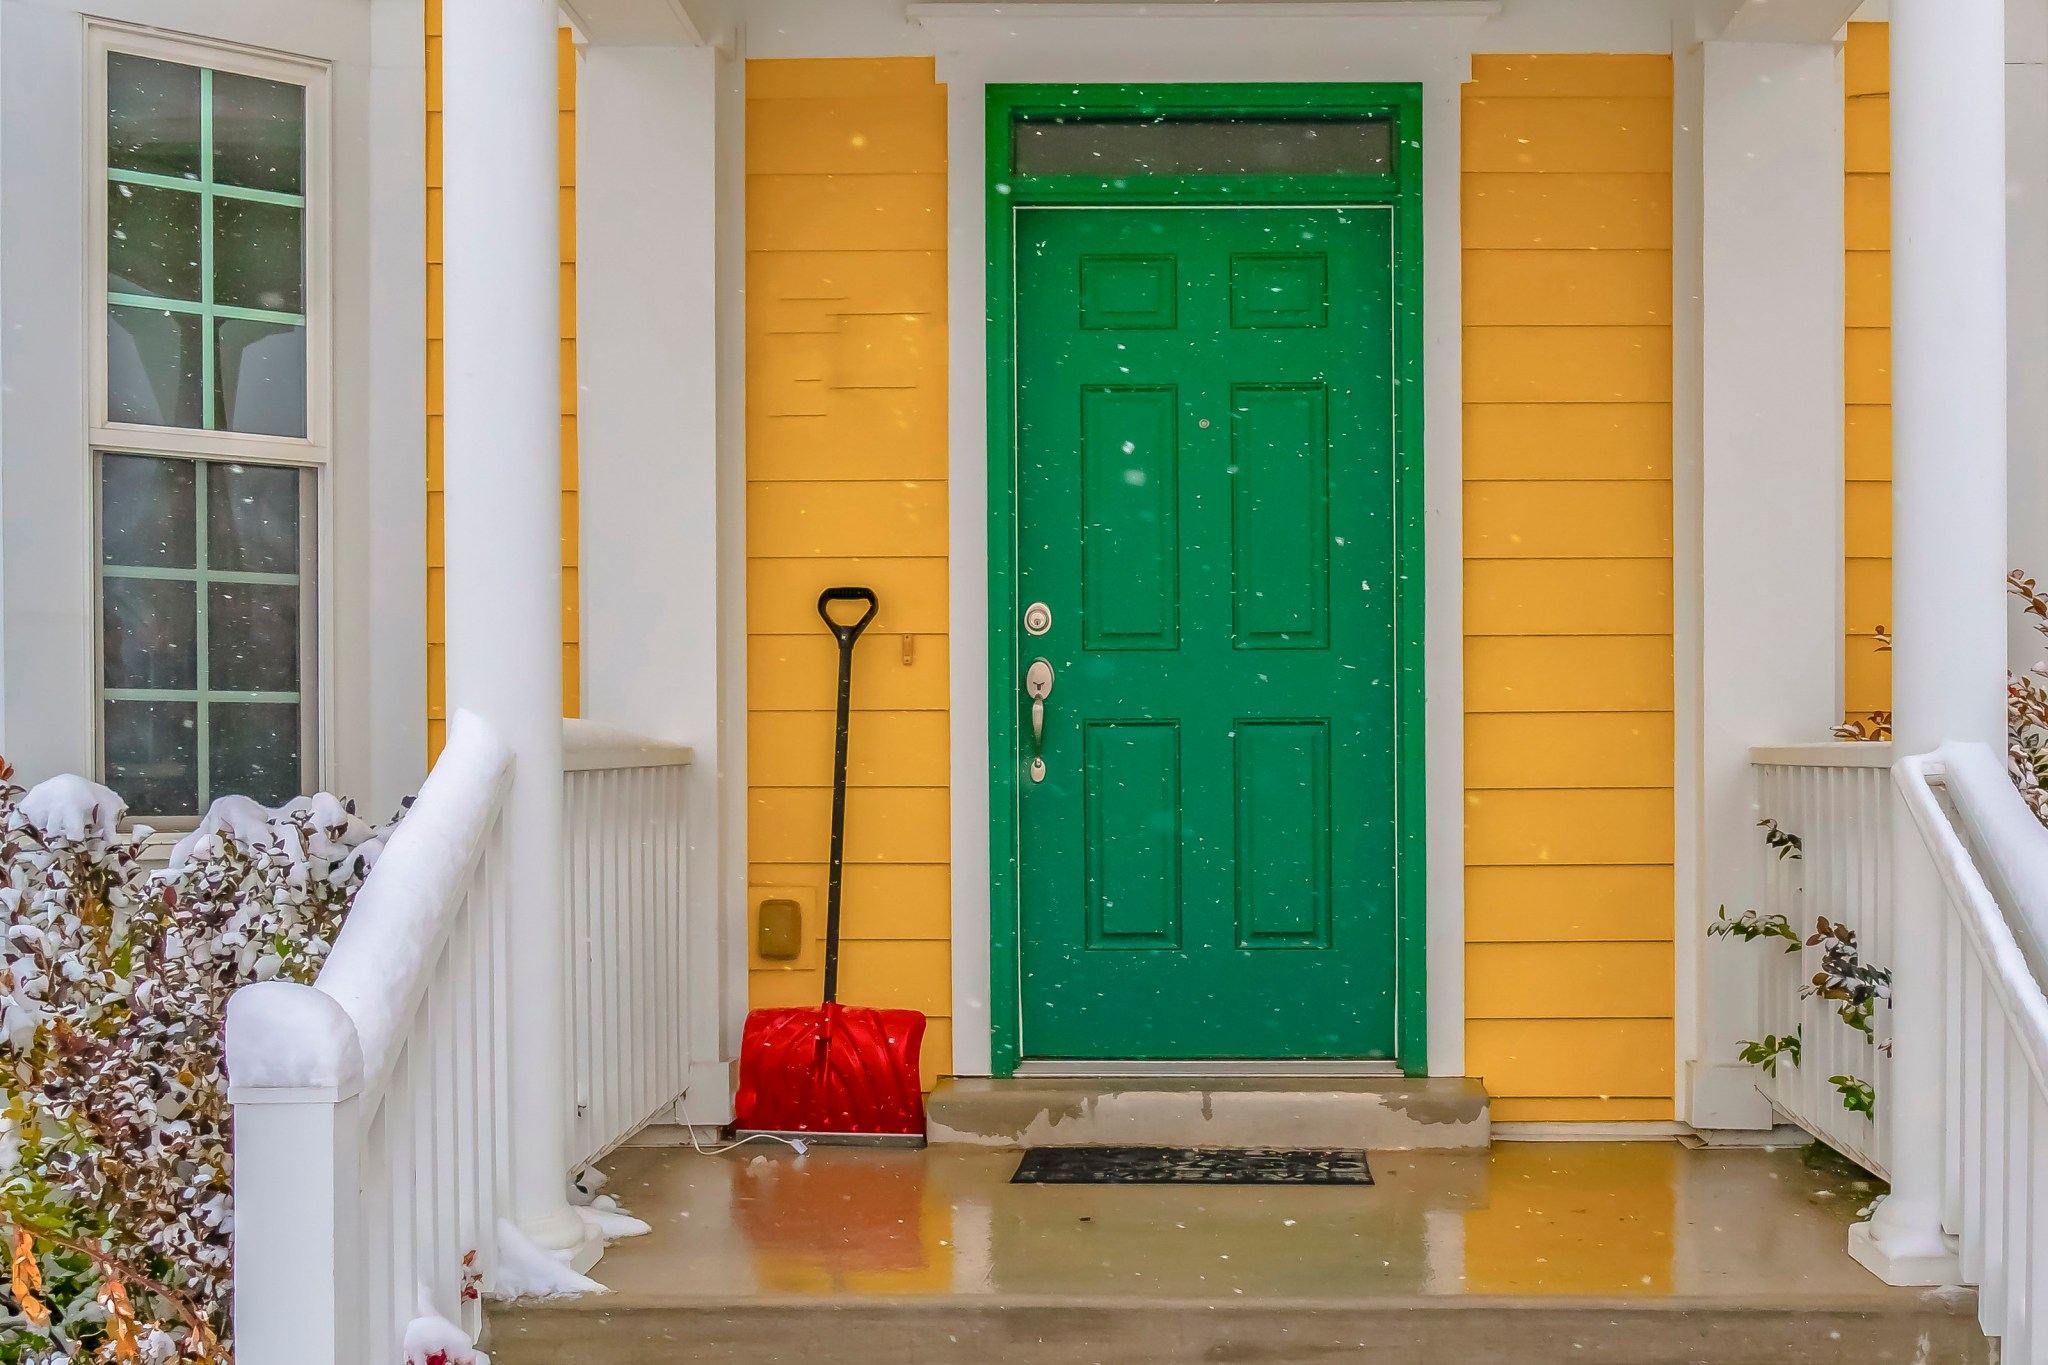 A red snow shovel leaning on a yellow house with a green front door during a gentle snowfall.